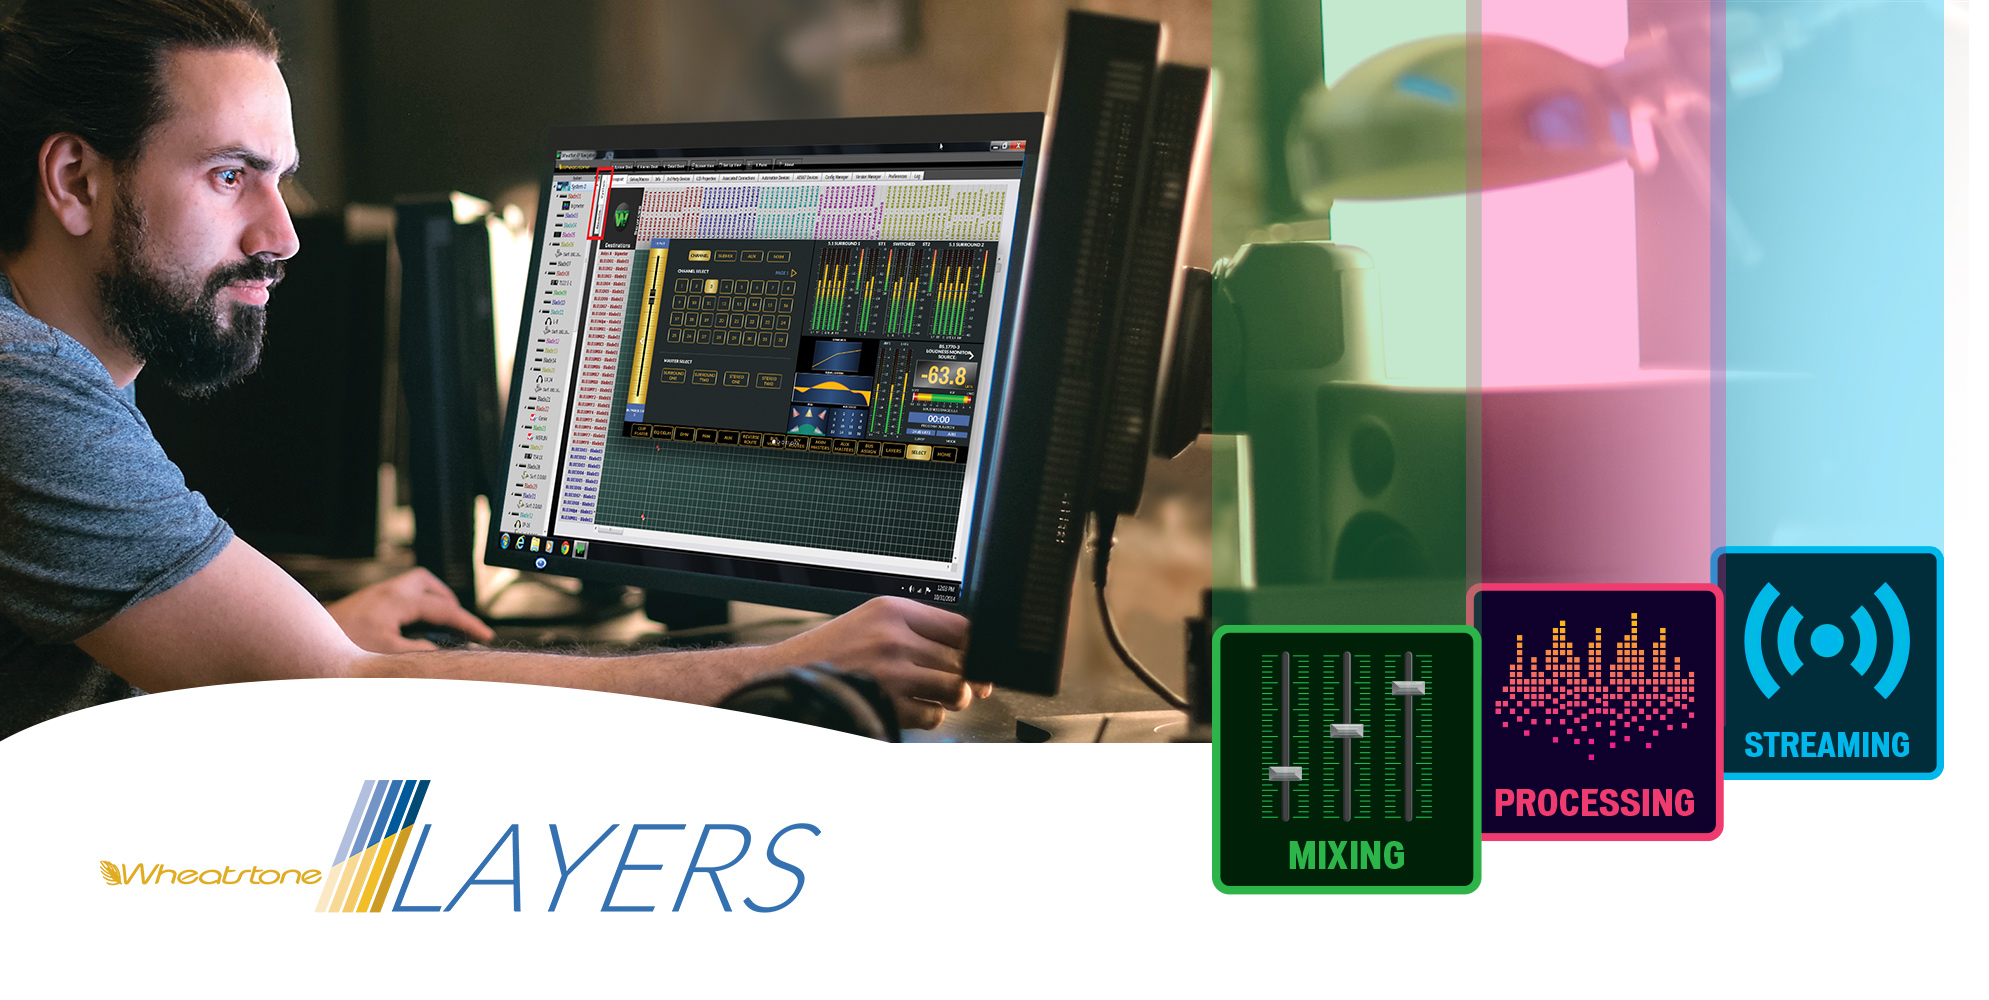 Wheatstone Layers Software Suite. Mixing, Streaming, and FM/HD Processing in an instance.